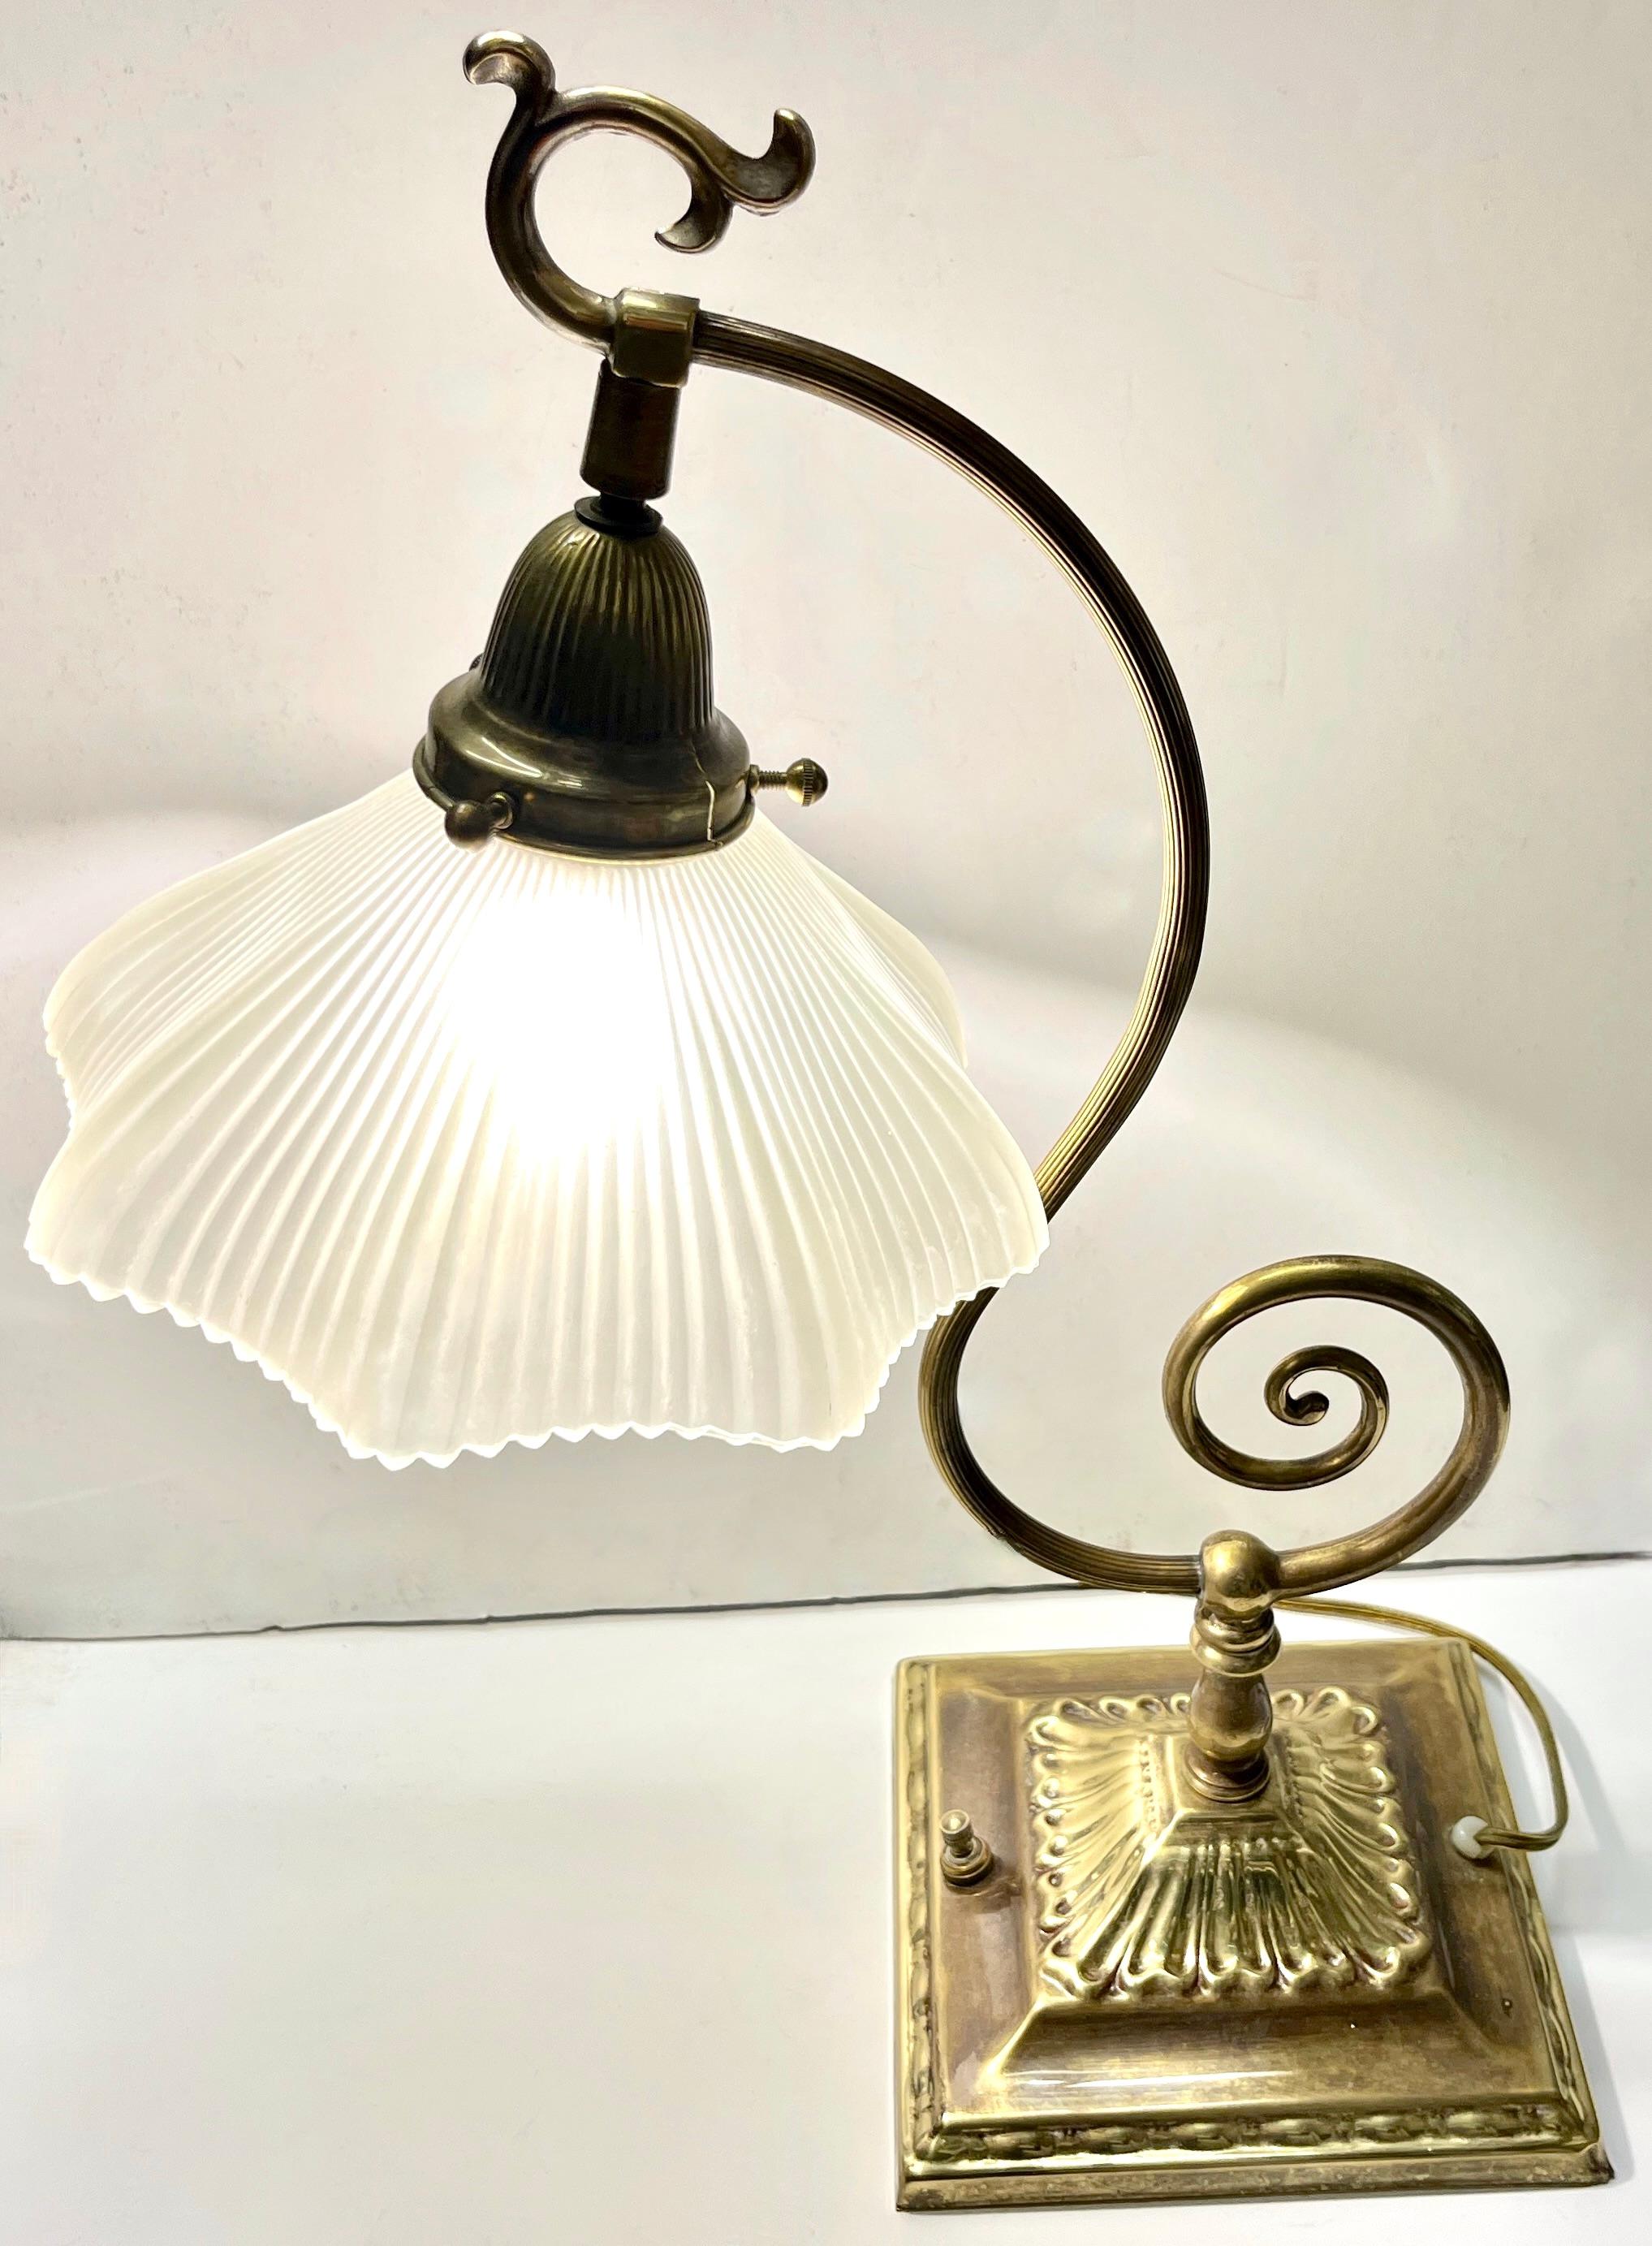 1950s American Art Deco Style Brass Table/Desk Lamp with Satin White Glass Shade In Good Condition For Sale In New York, NY